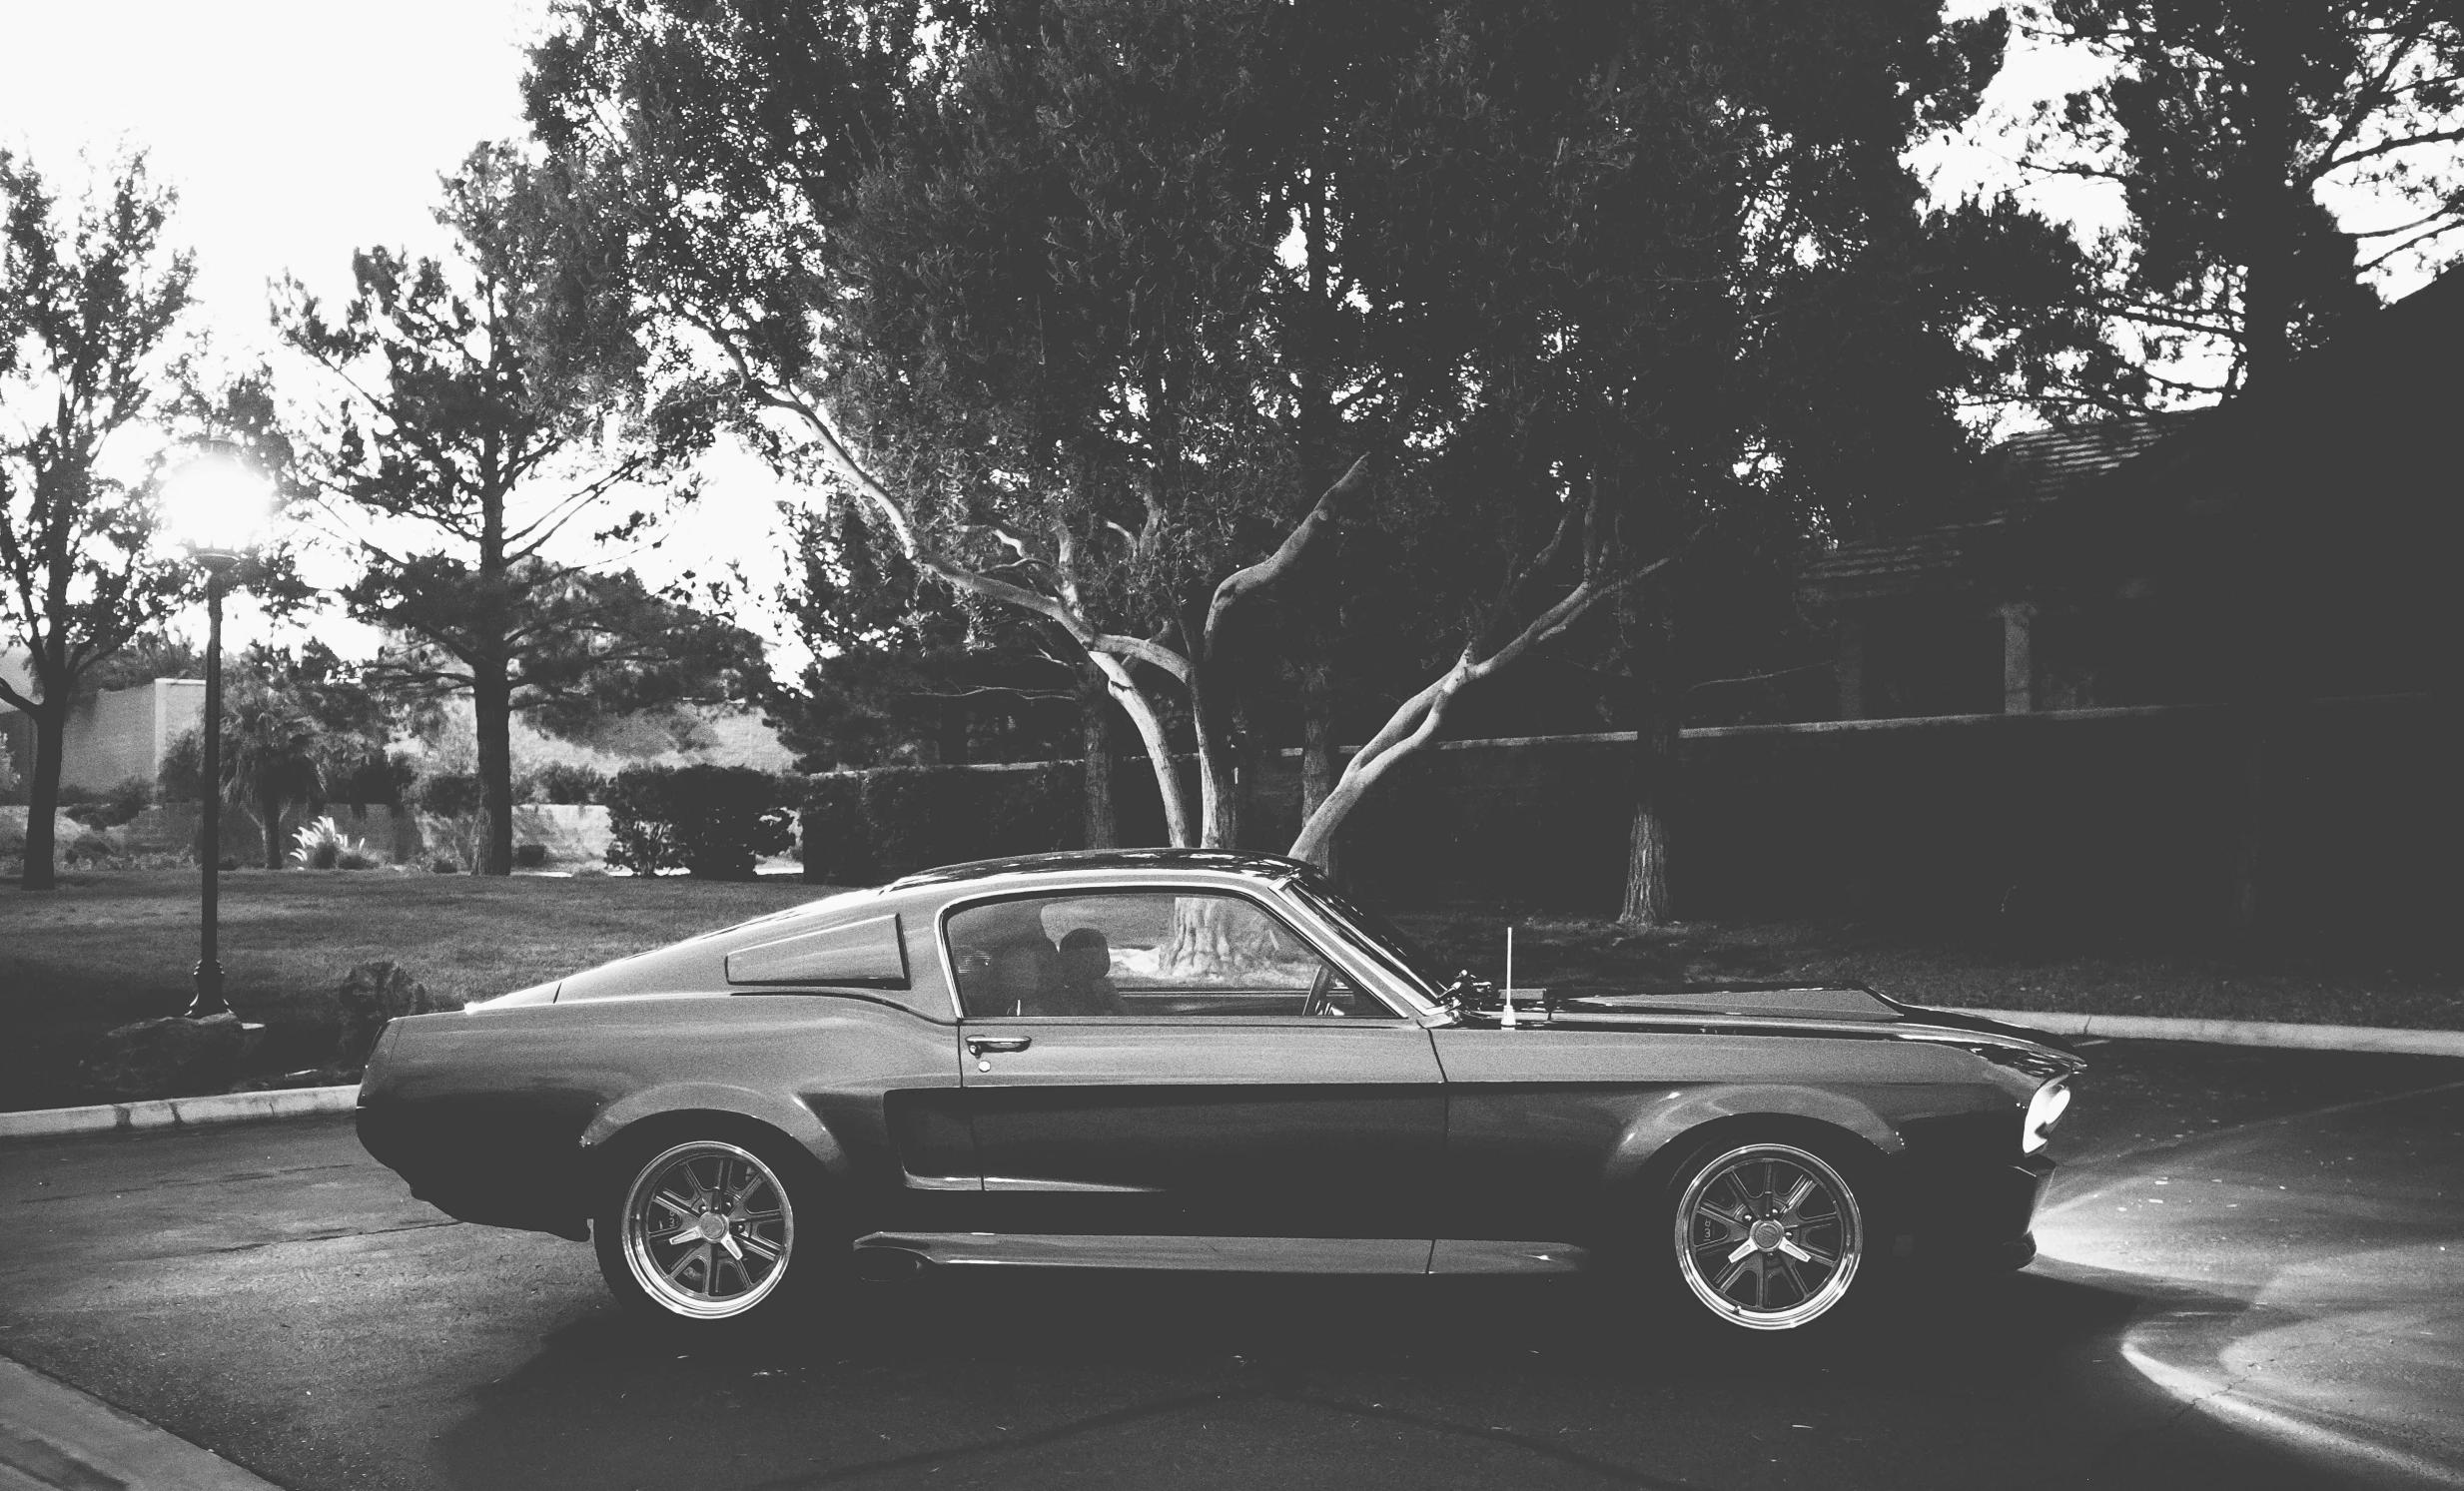 an old mustang is shown in black and white